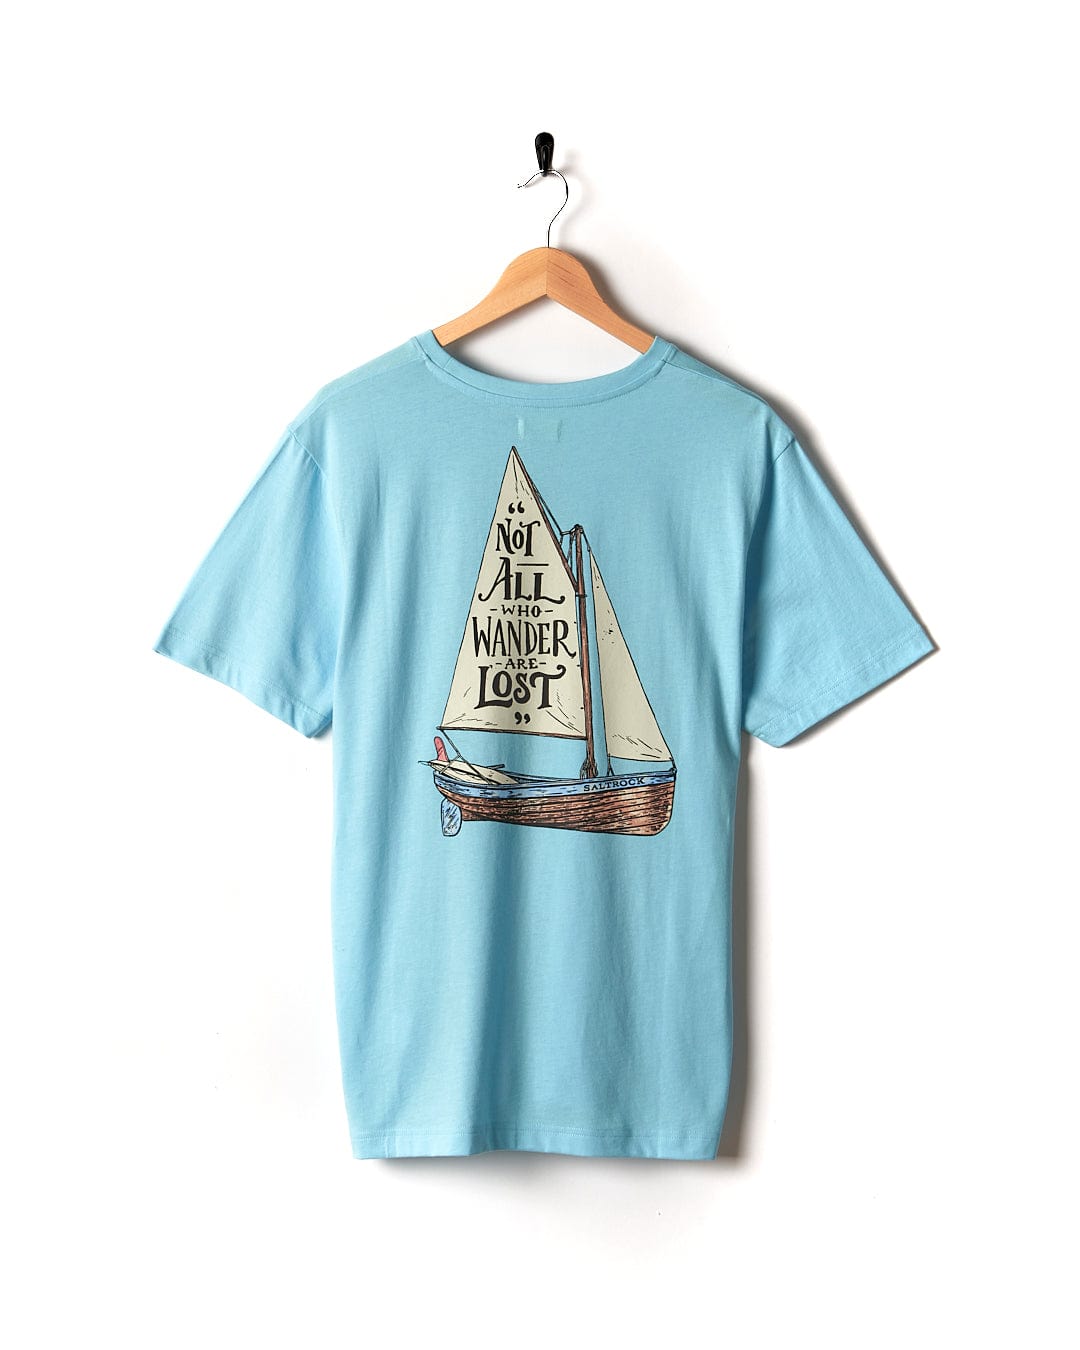 A Lost Ships - Mens Short Sleeve T-Shirt - Light Blue with a sailboat on it. (Brand: Saltrock)